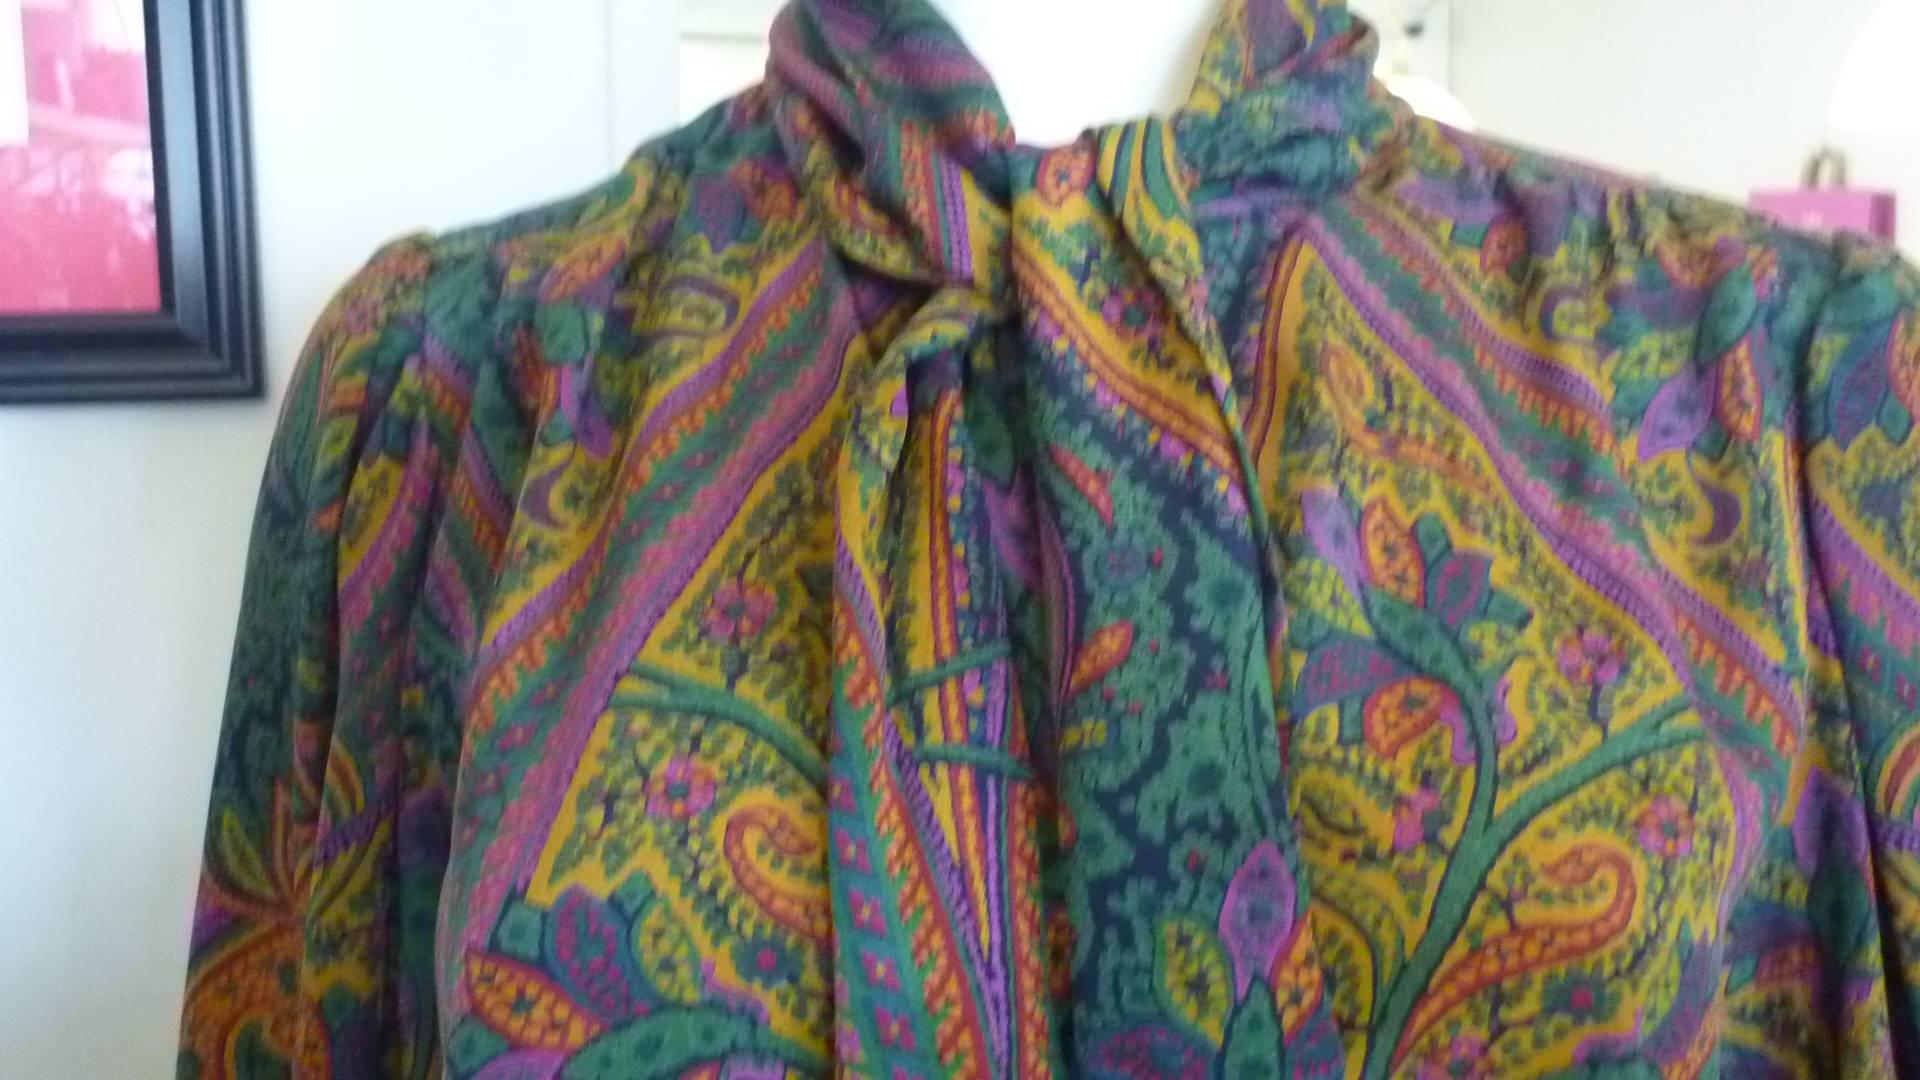 Bold paisley pattern of green, purple, orange and black, this blouse is typical of the 80s with an attached scarfand baloon sleeves.